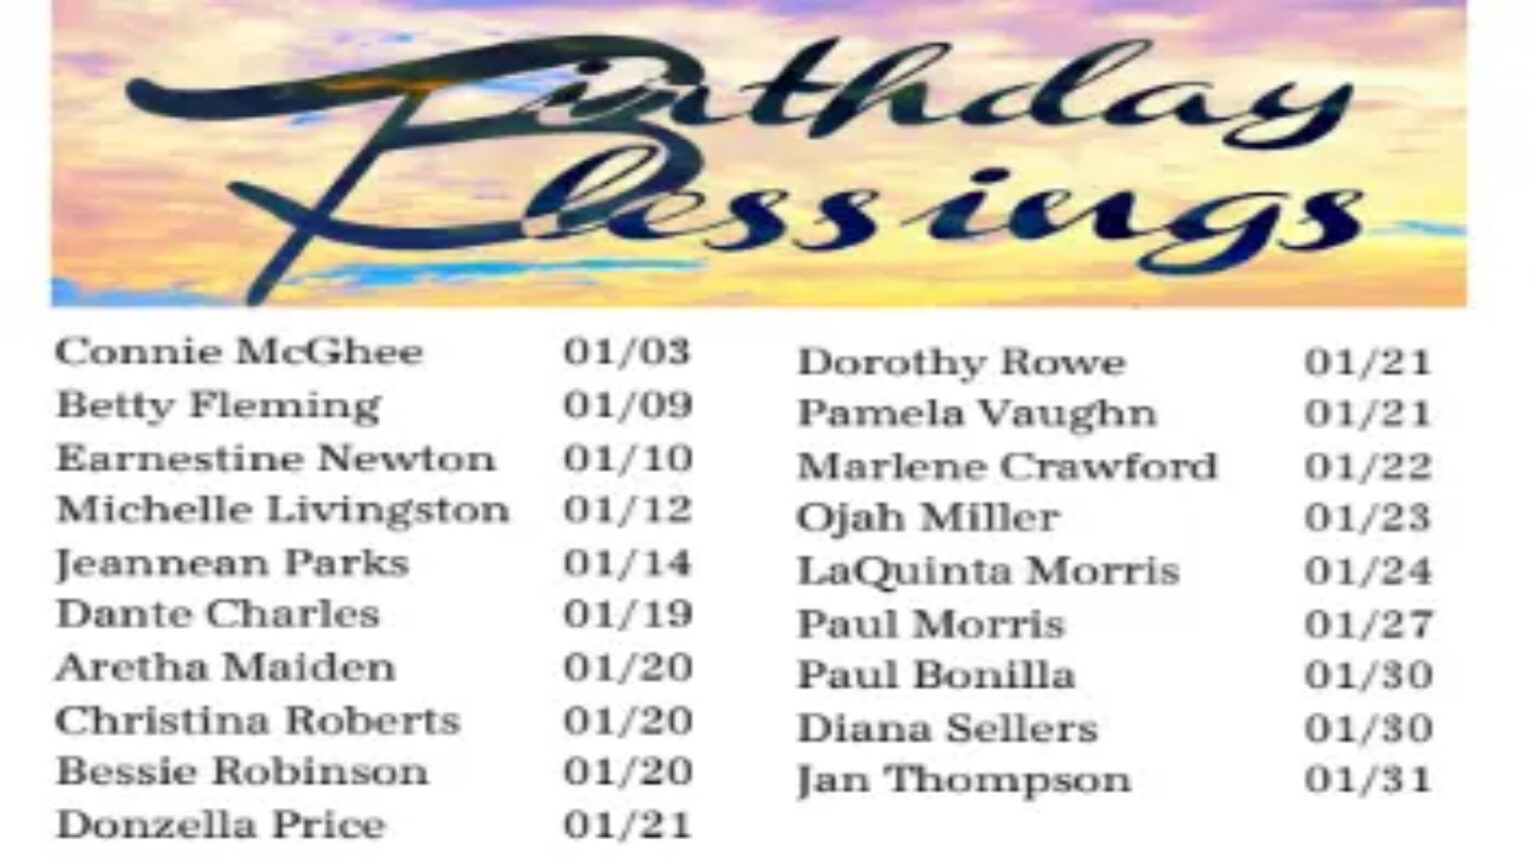 January 24 birthdays - Made with PosterMyWall